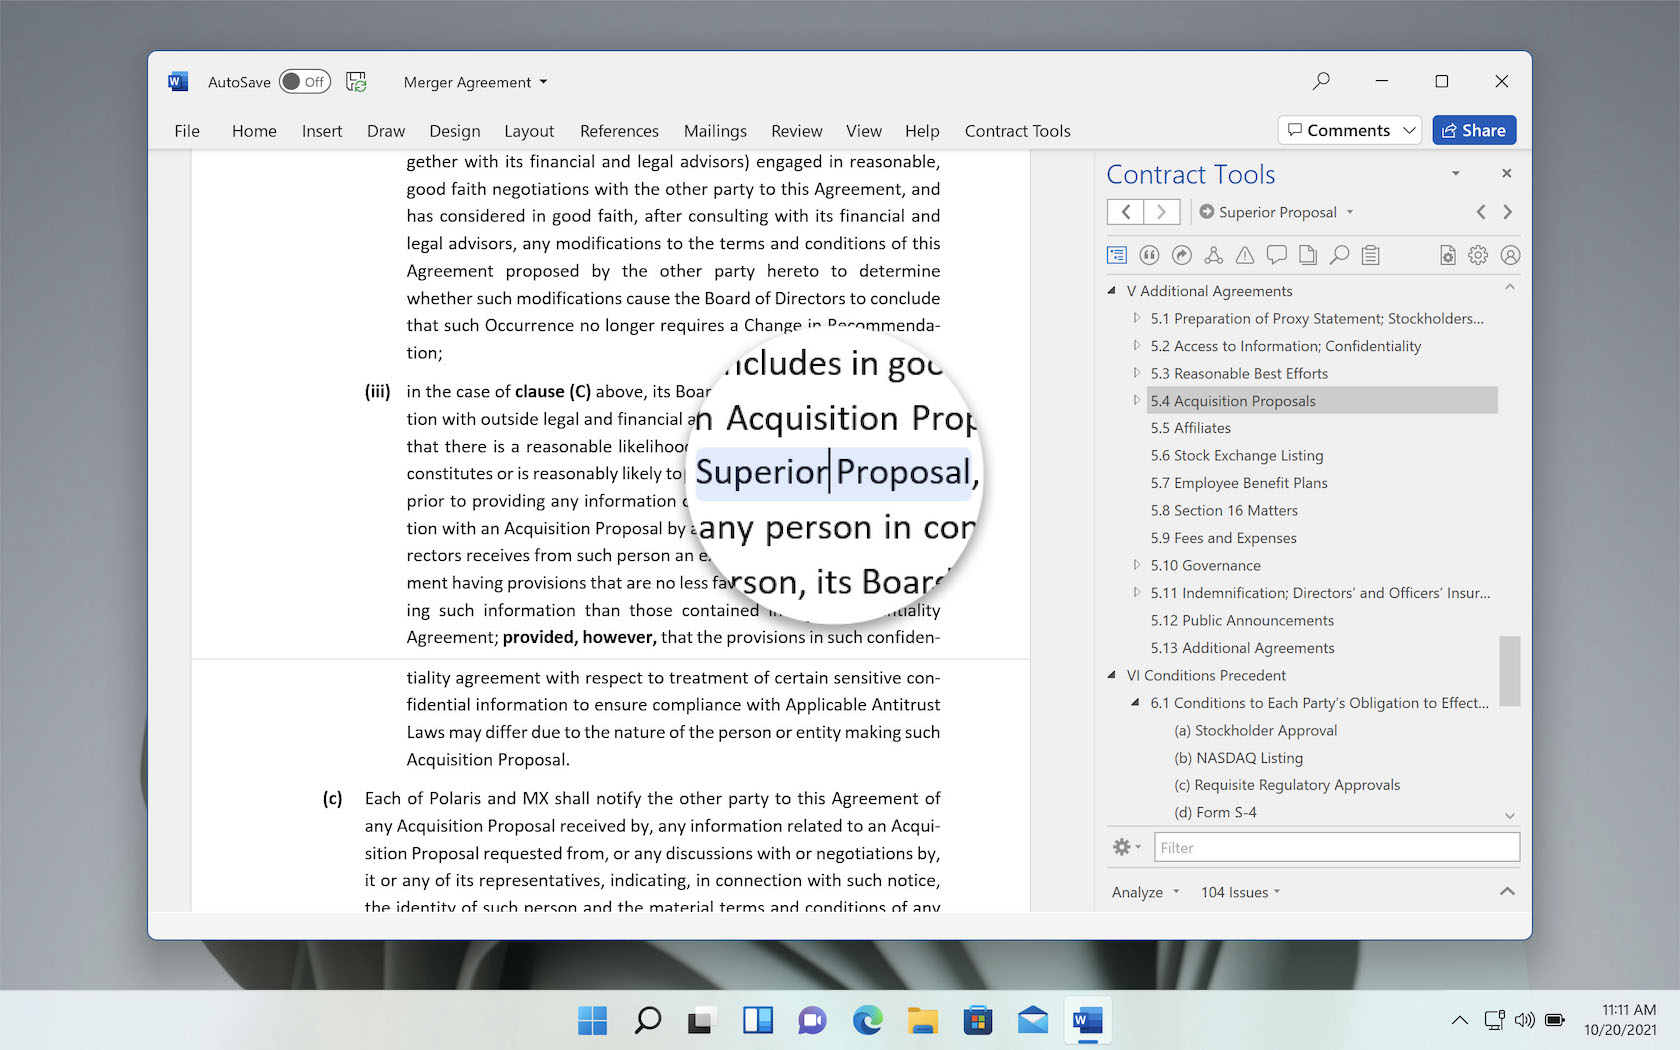 Paper Software: Contract Tools for Microsoft Word & Turner for Mac